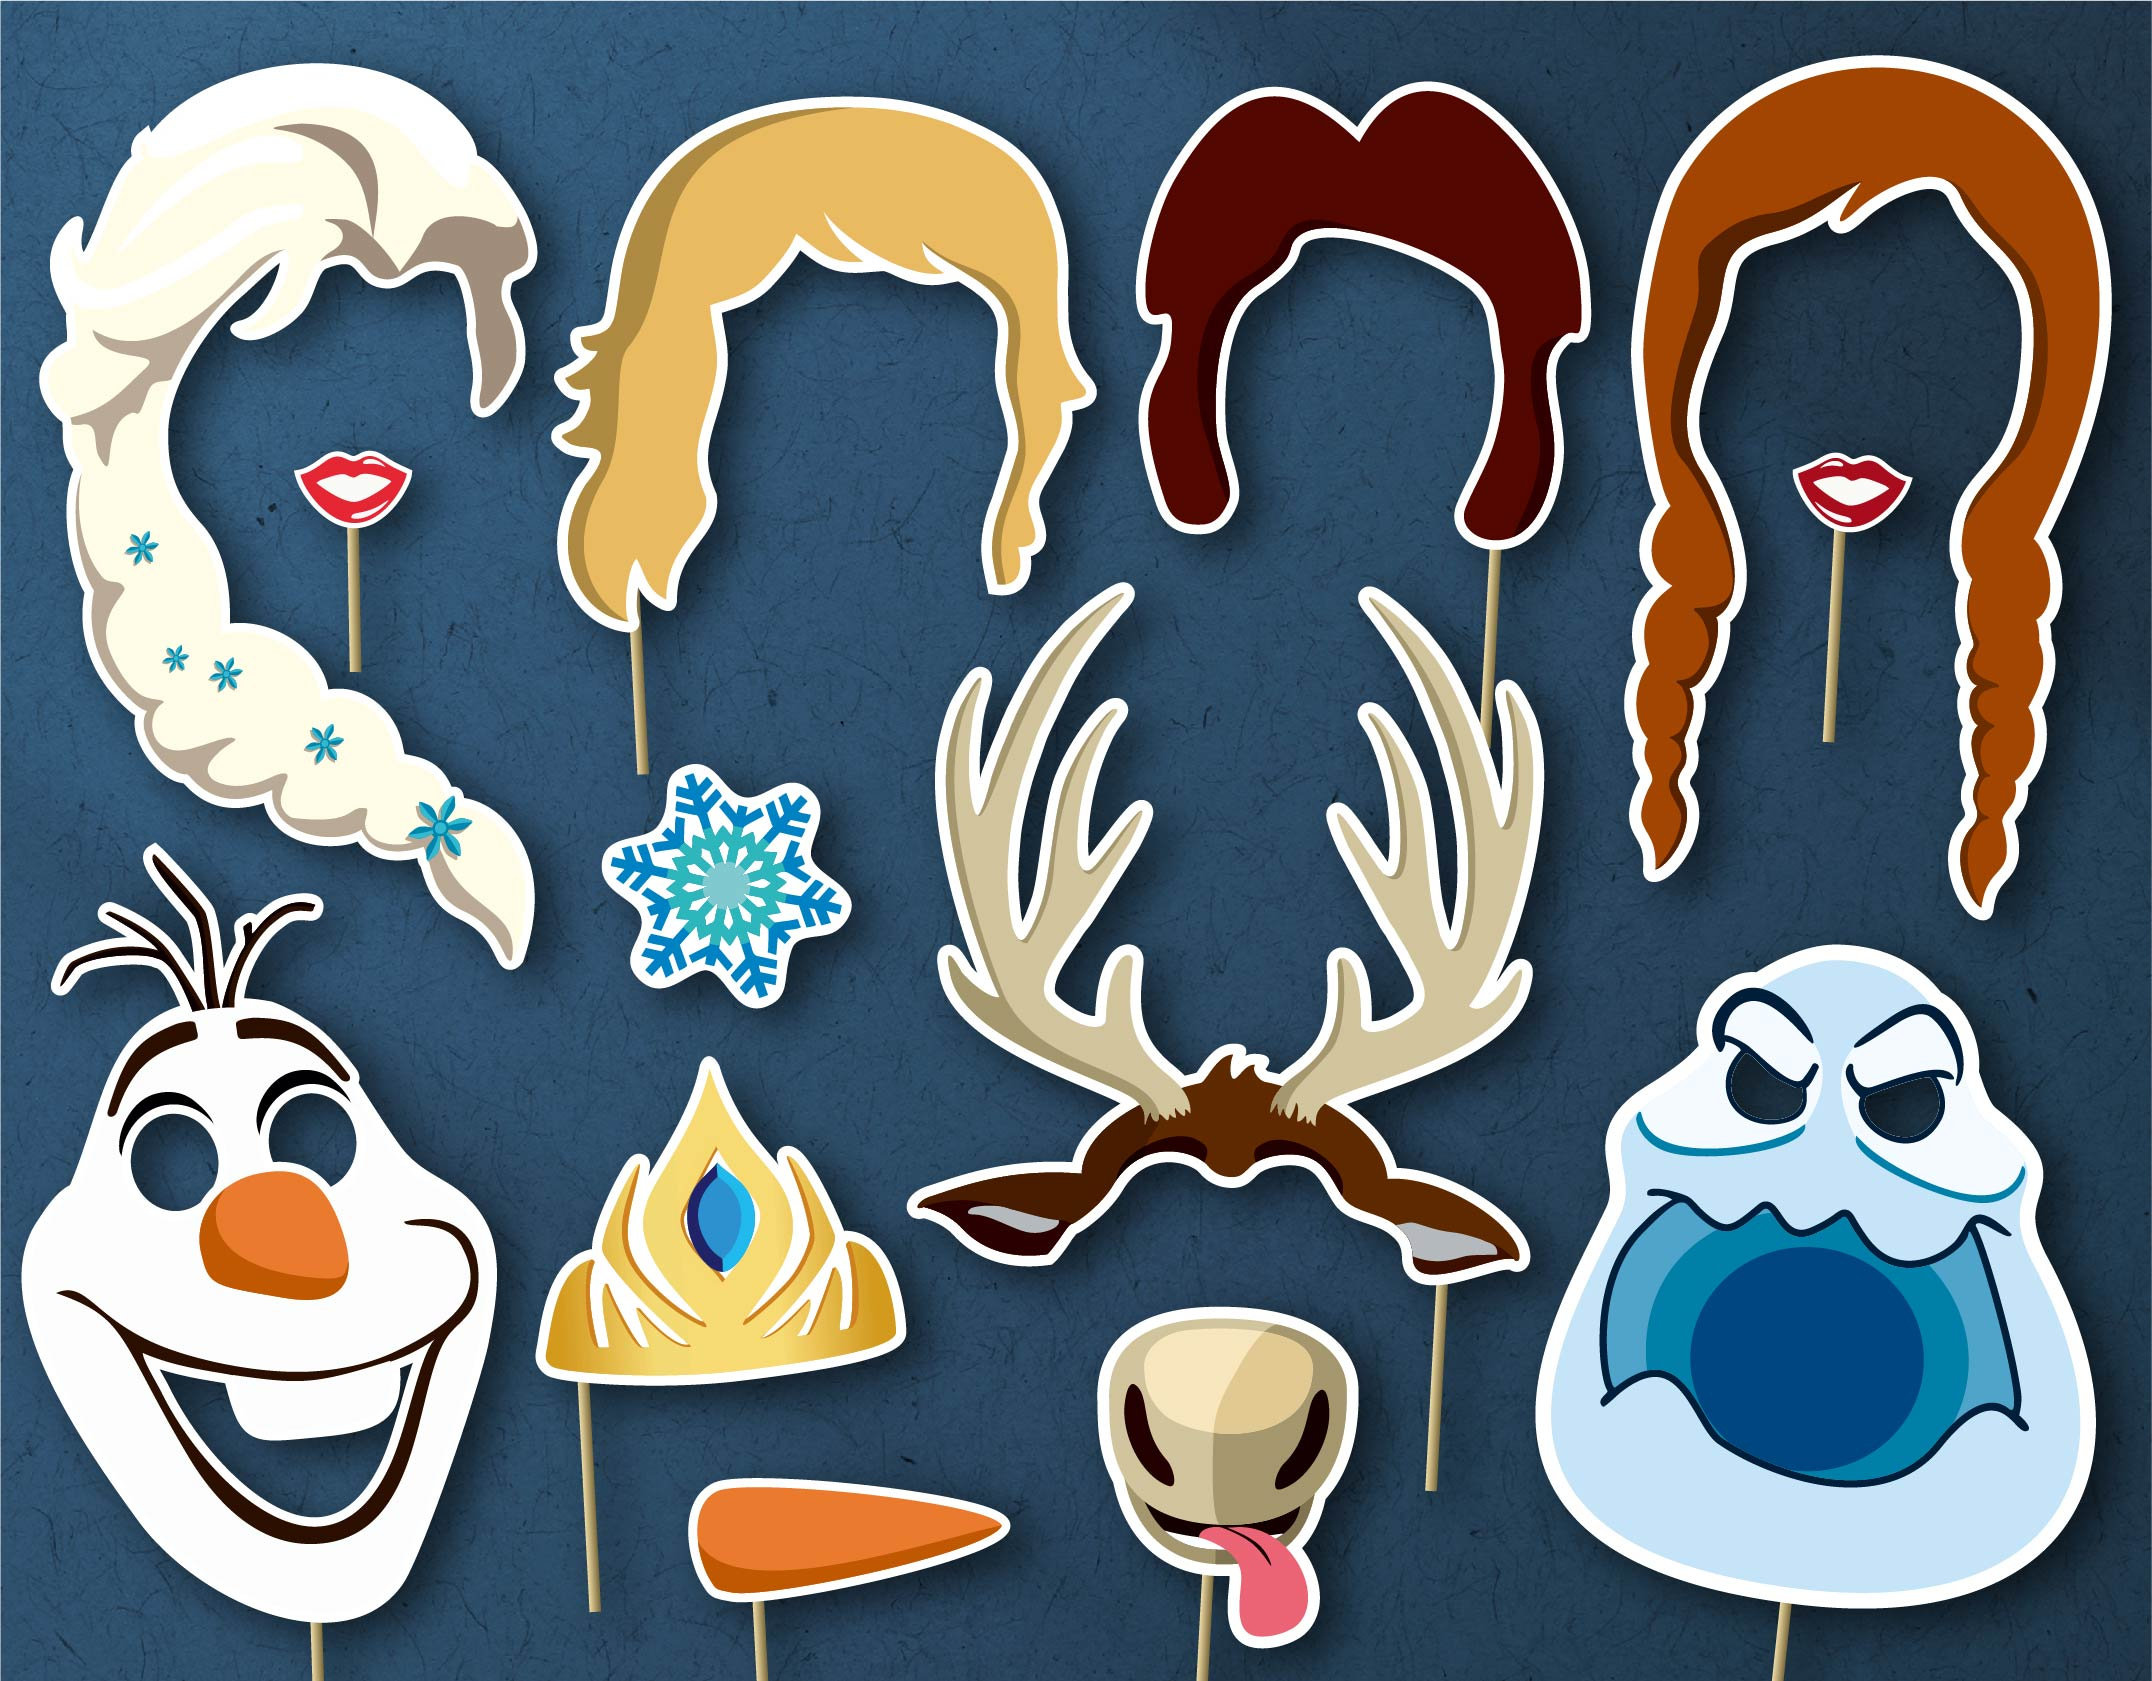 Frozen Photo Booth - Etsy in Free Printable Frozen Photo Booth Props